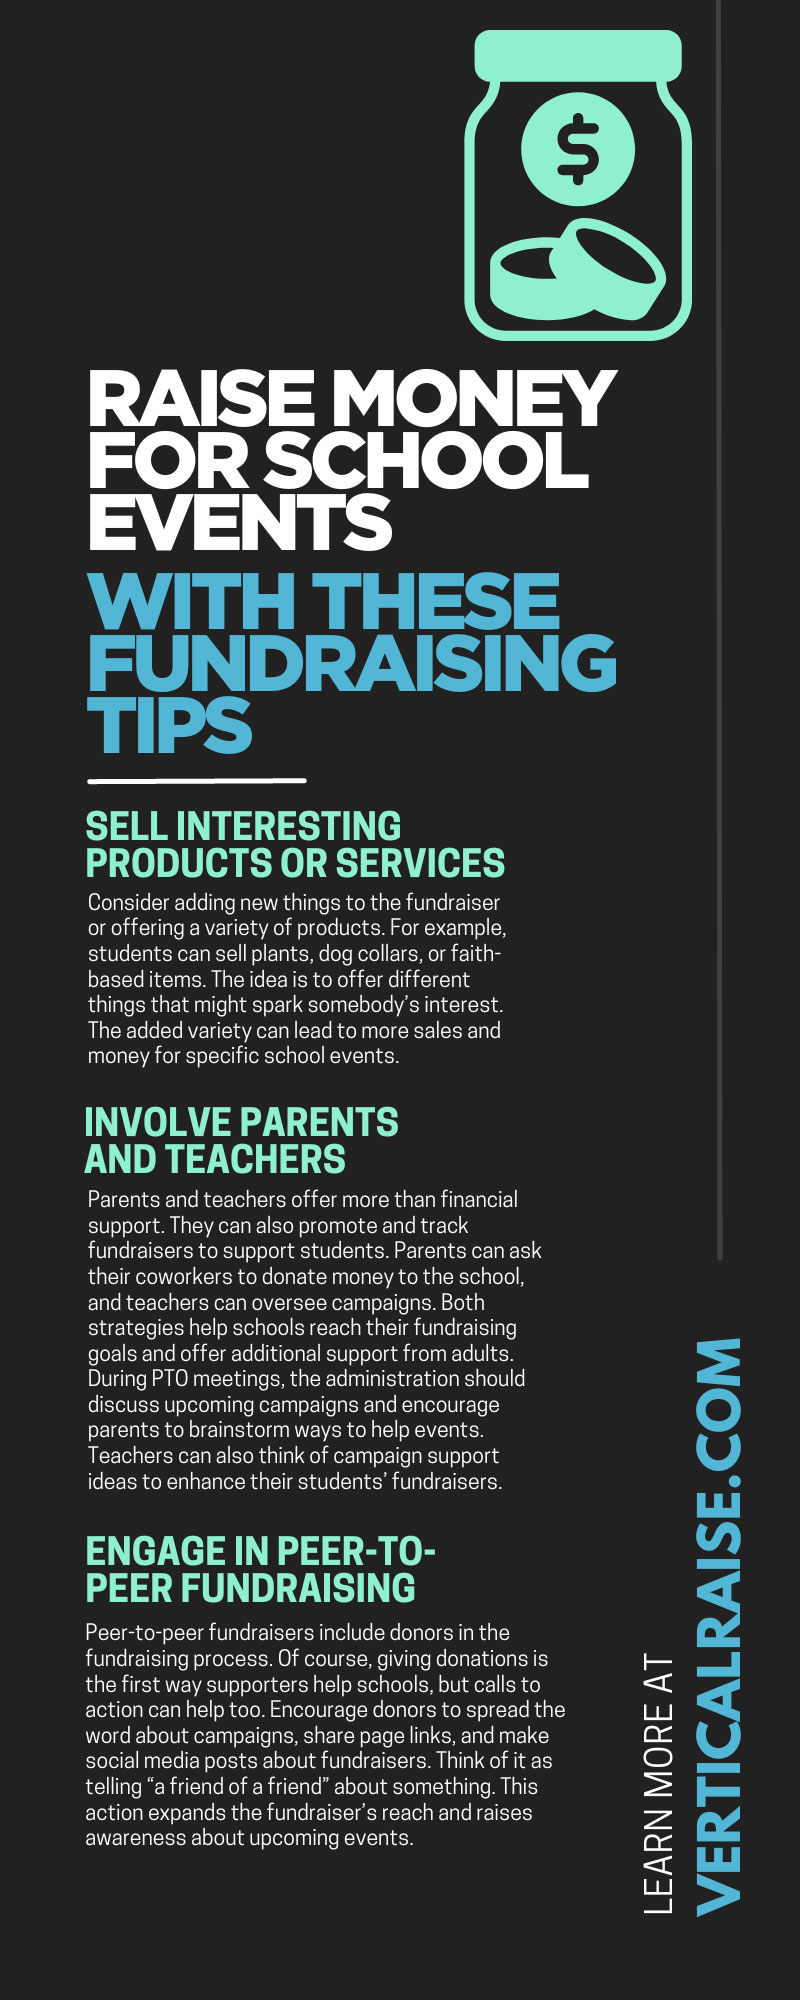 Raise Money for School Events With These 10 Fundraising Tips